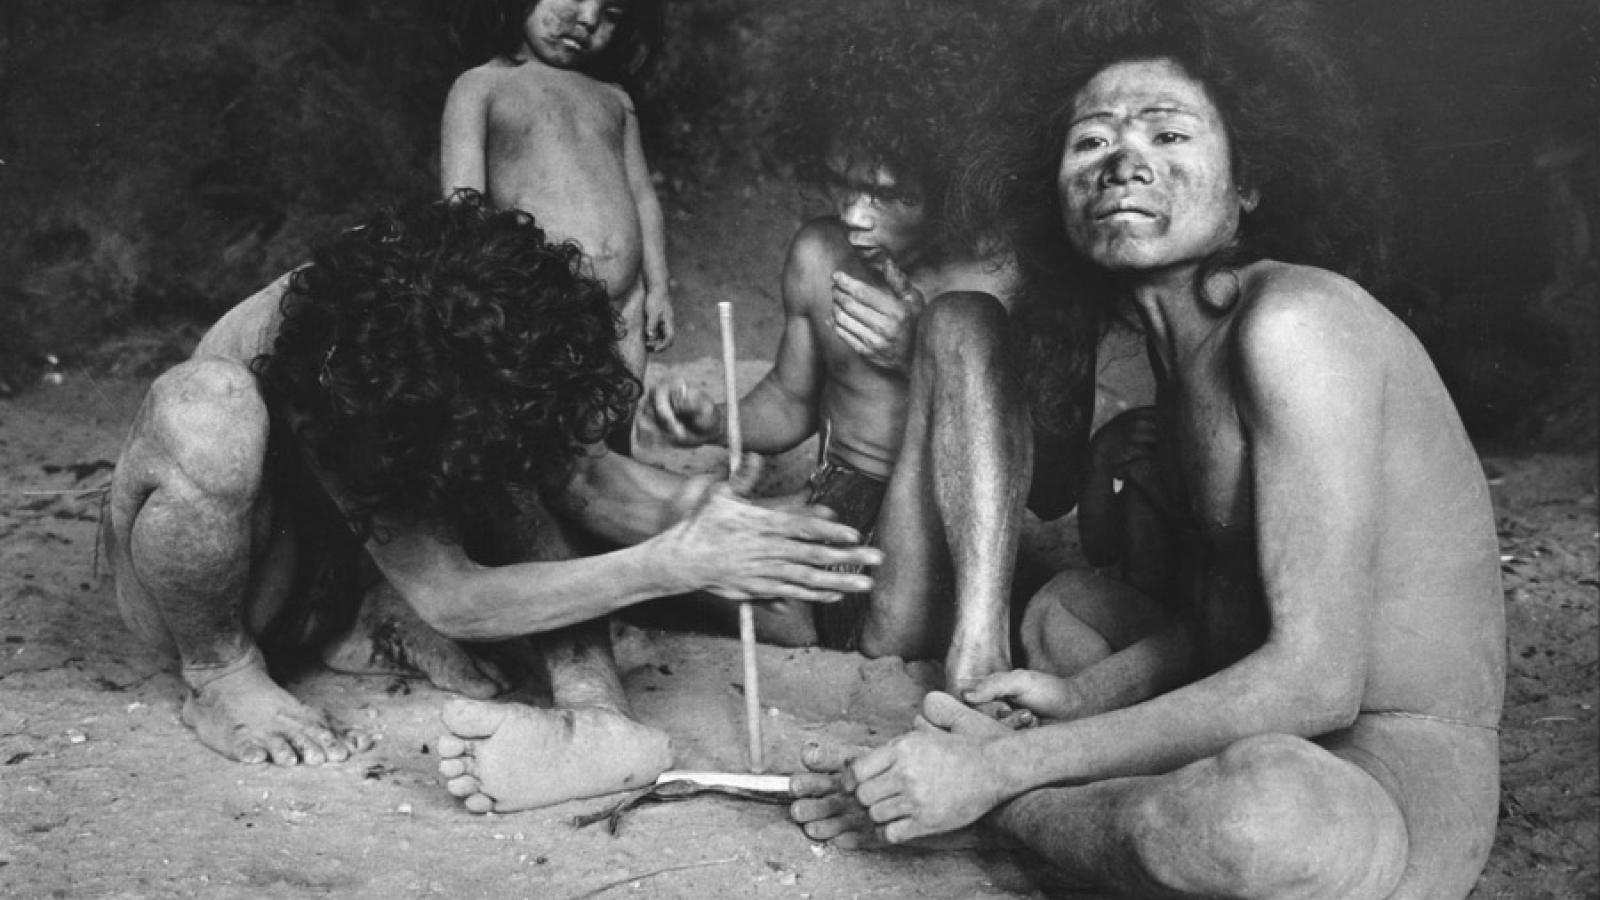 Image of John Nance: "Making a Fire," black and white photography, 1972-1974